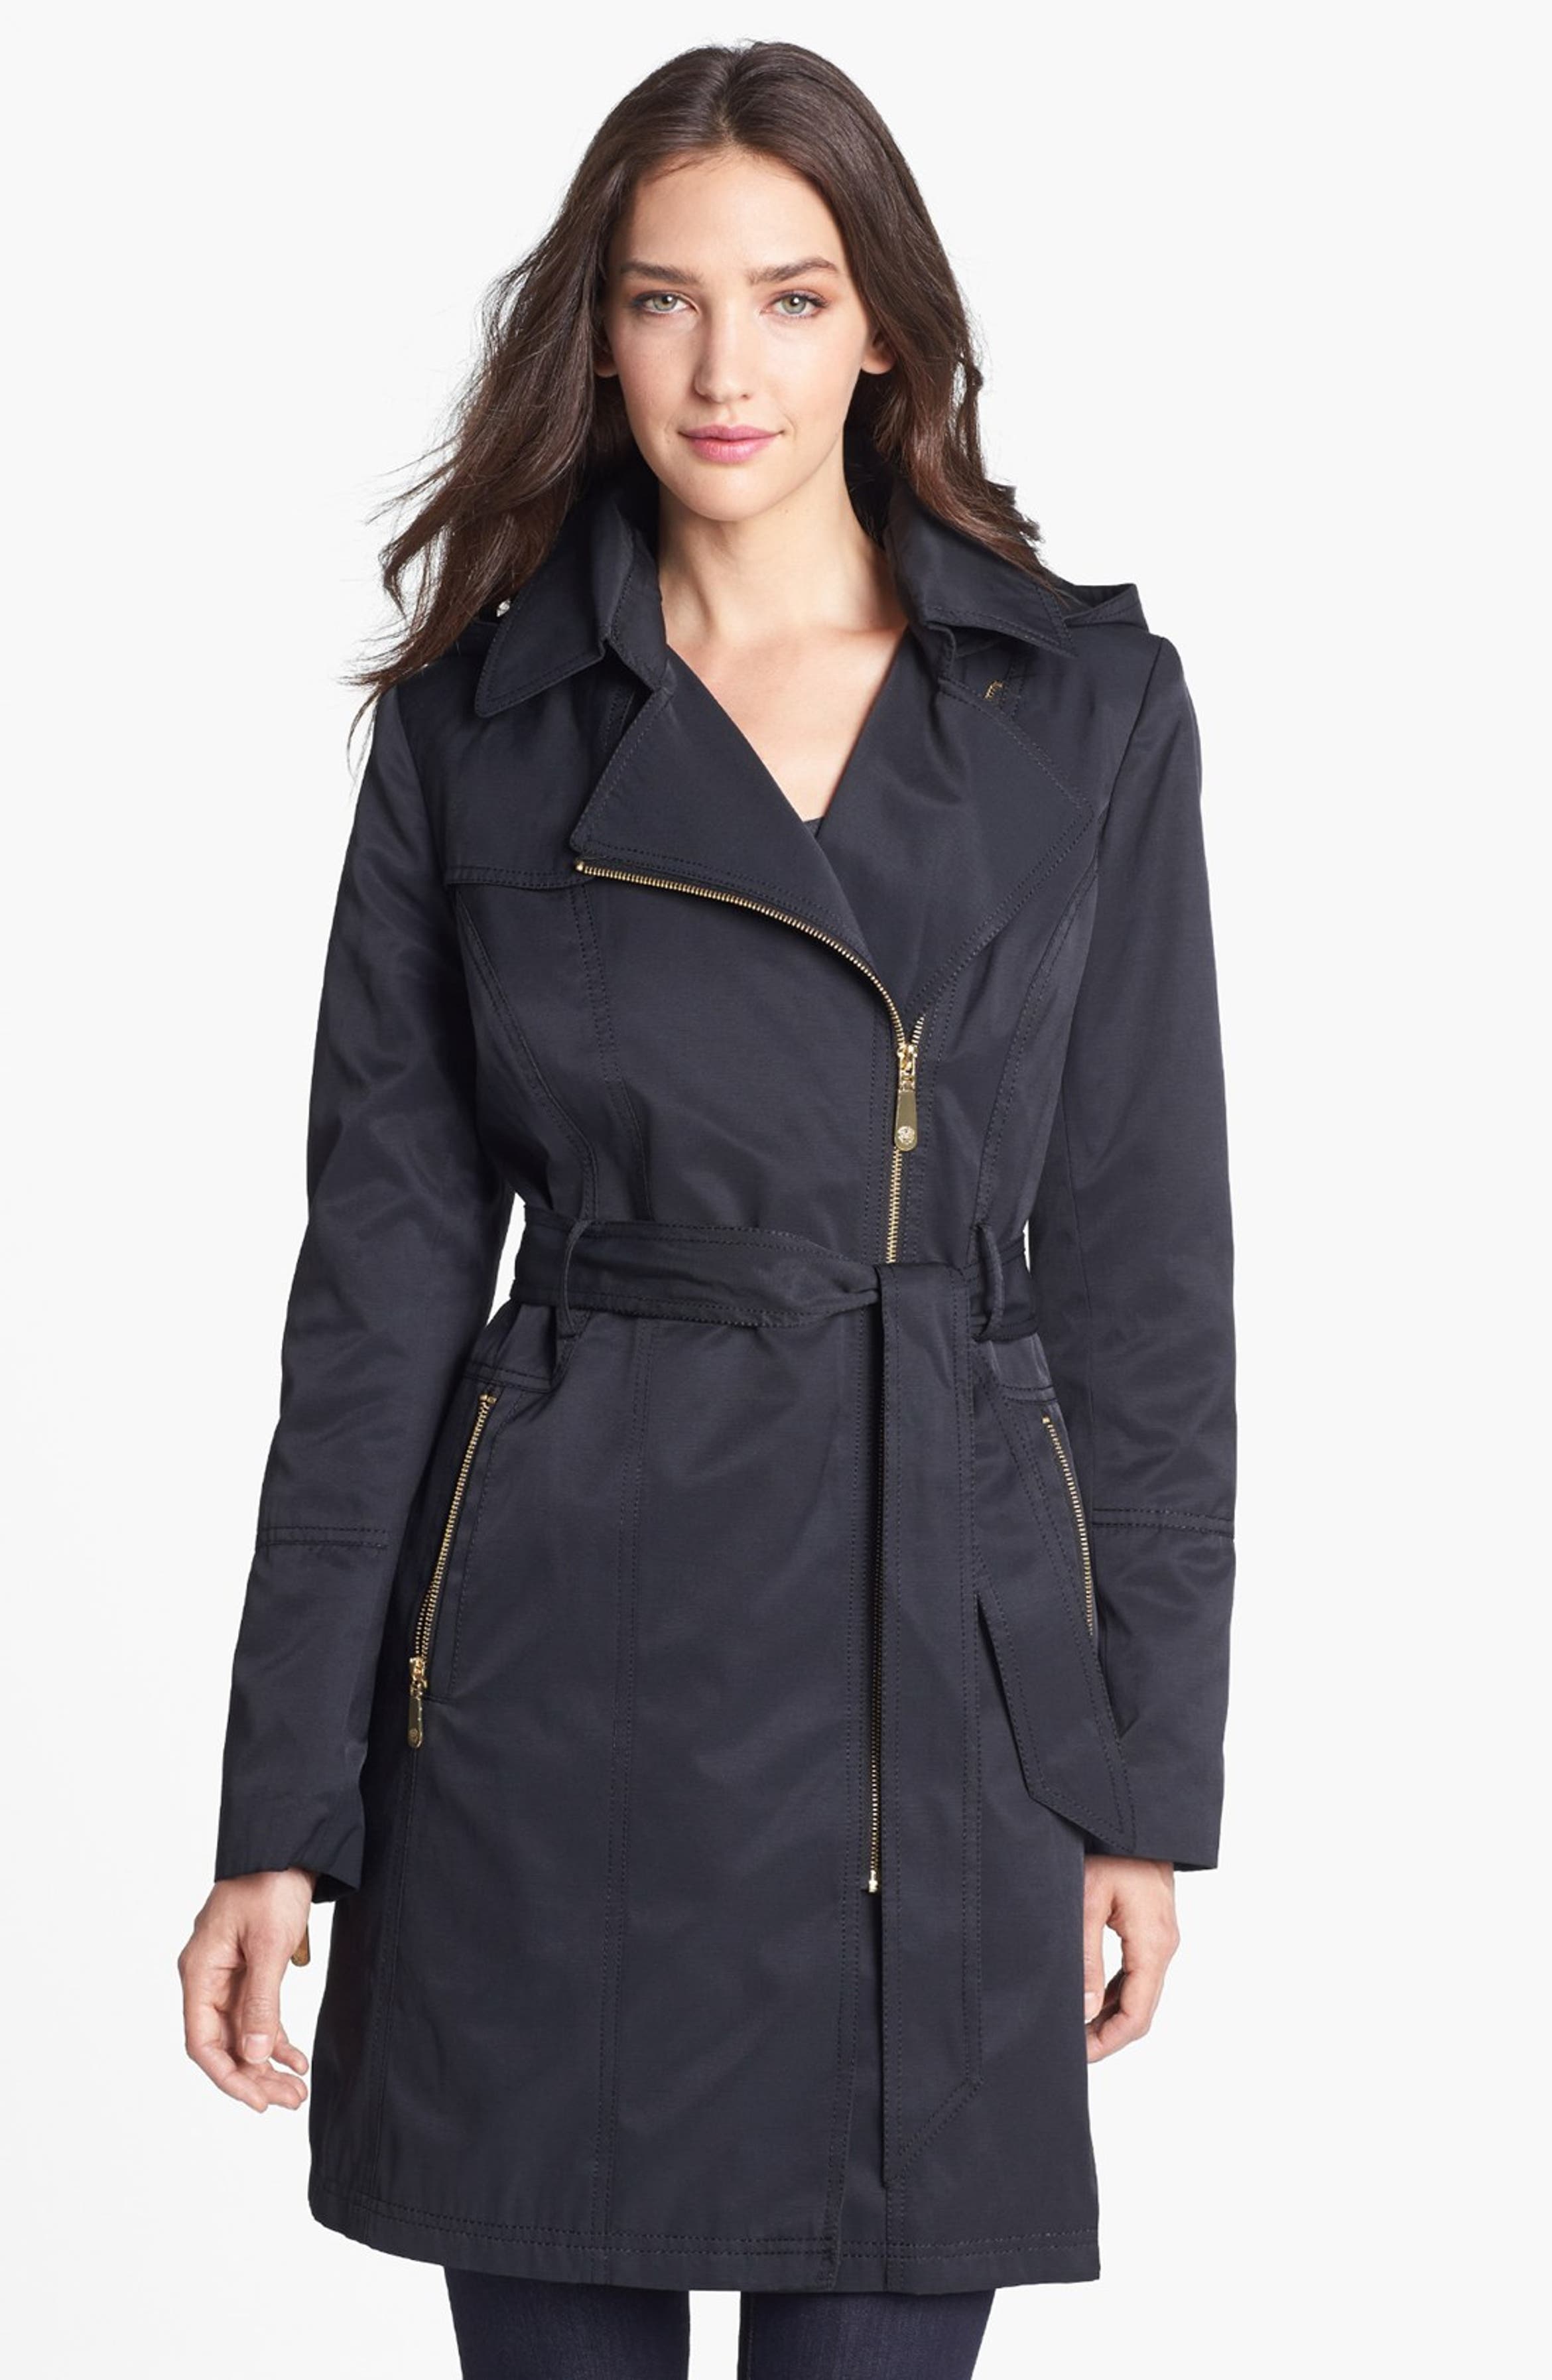 Vince Camuto Asymmetrical Zip Trench Coat with Detachable Hood | Nordstrom